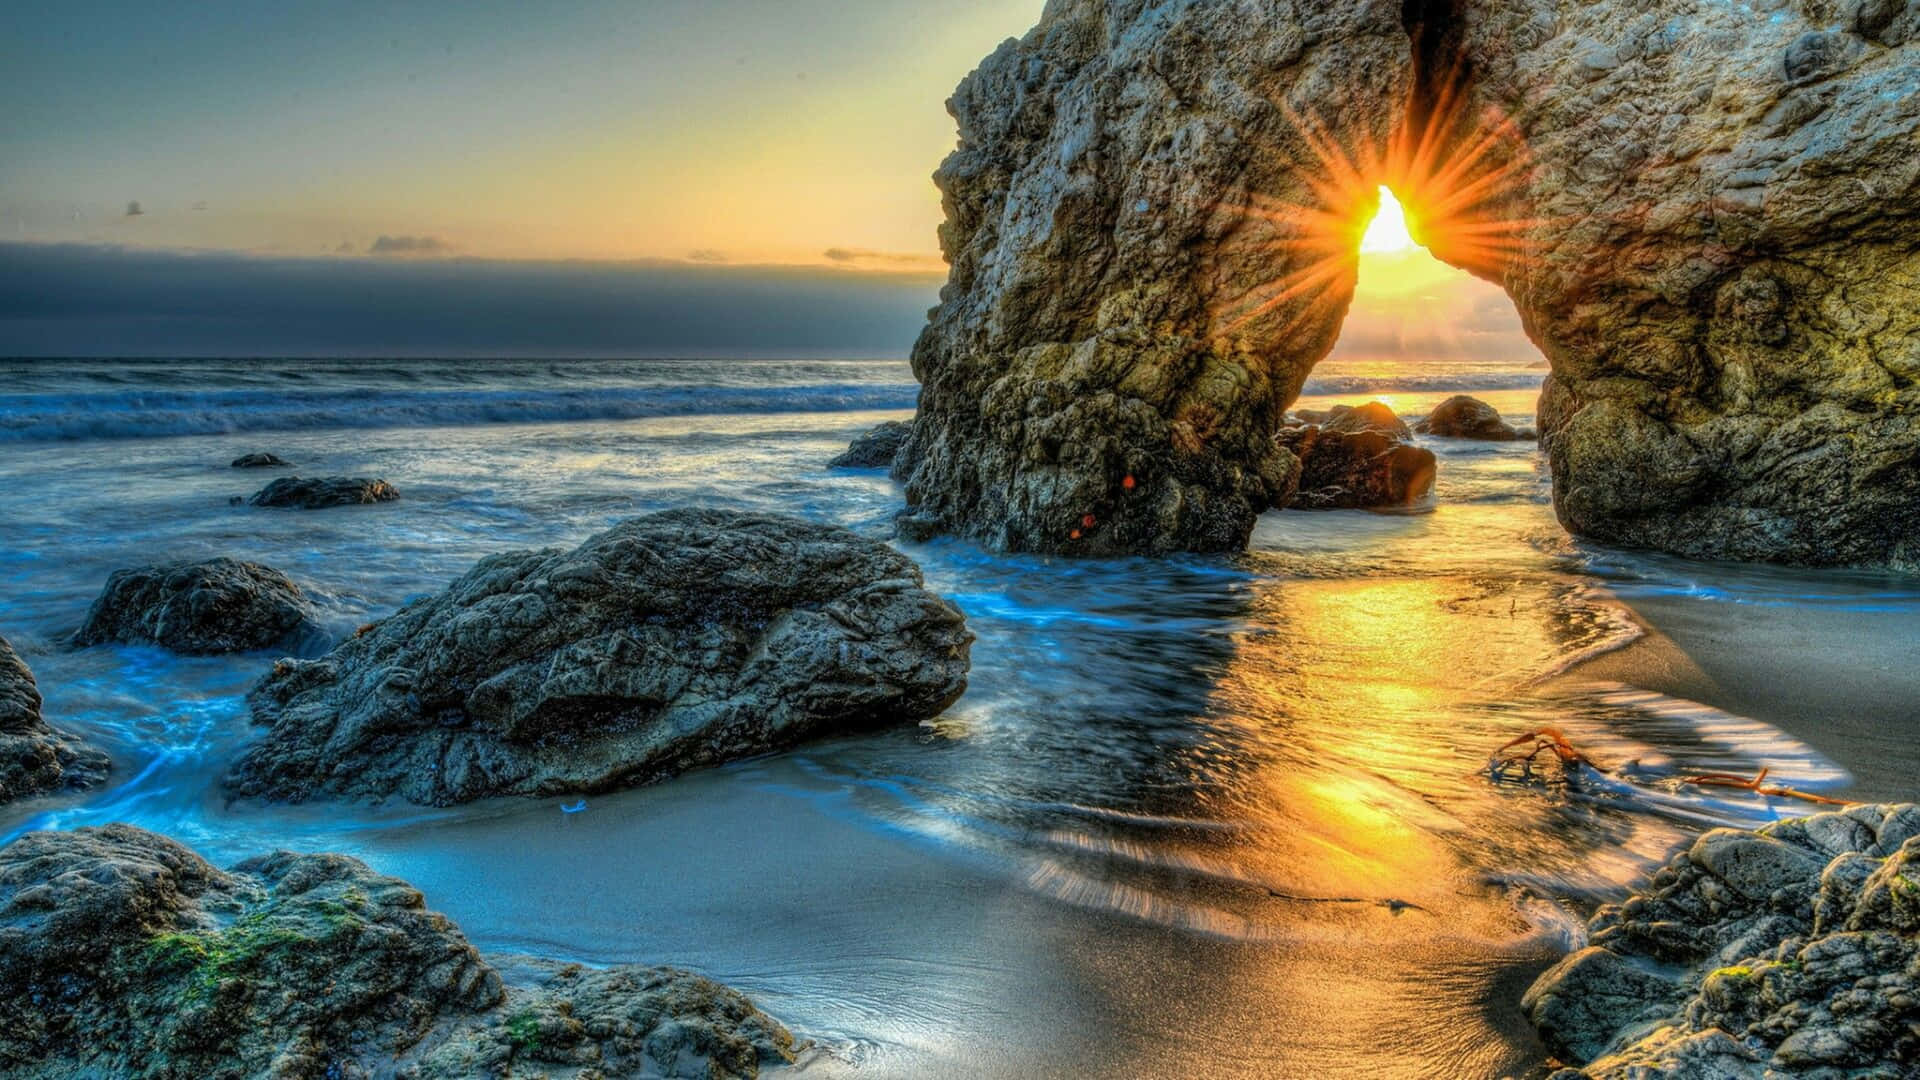 A Rock Arch In The Ocean At Sunset Background